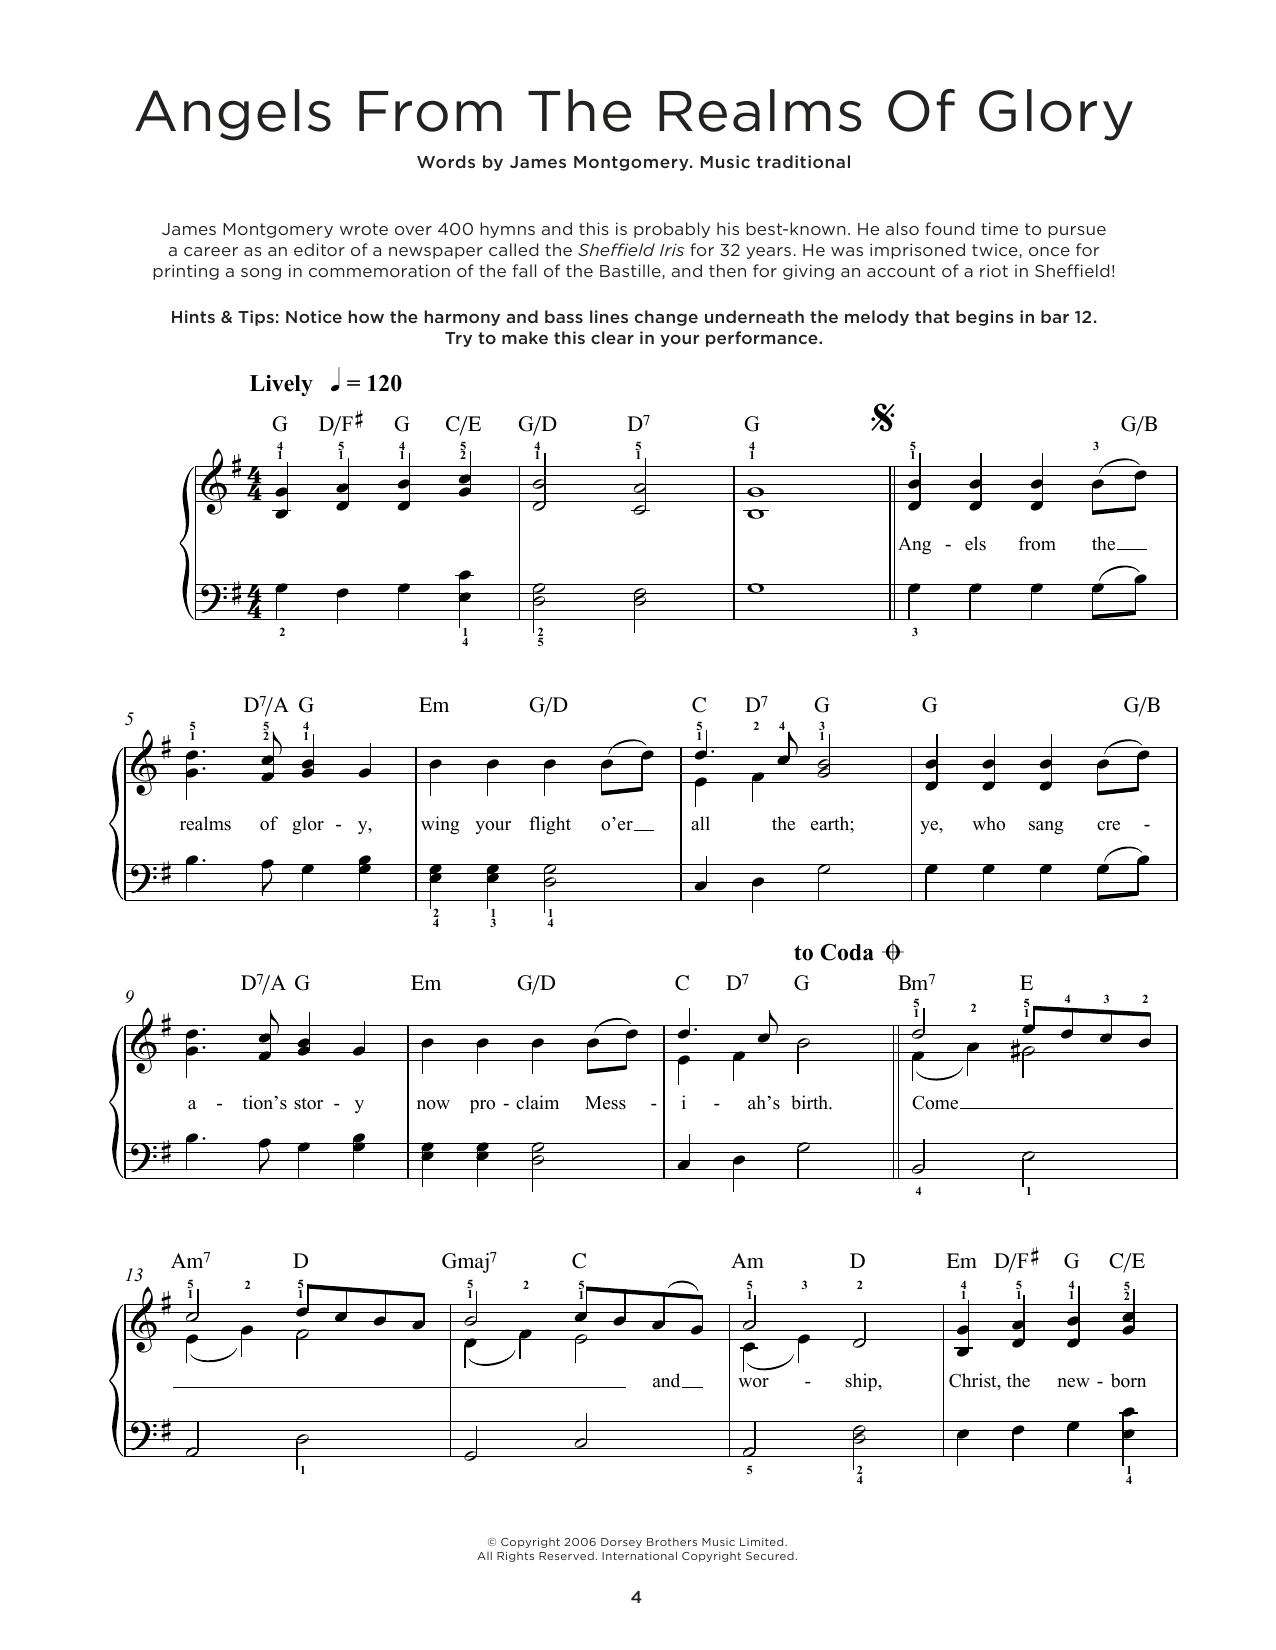 Download James Montgomery Angels From The Realms Of Glory Sheet Music